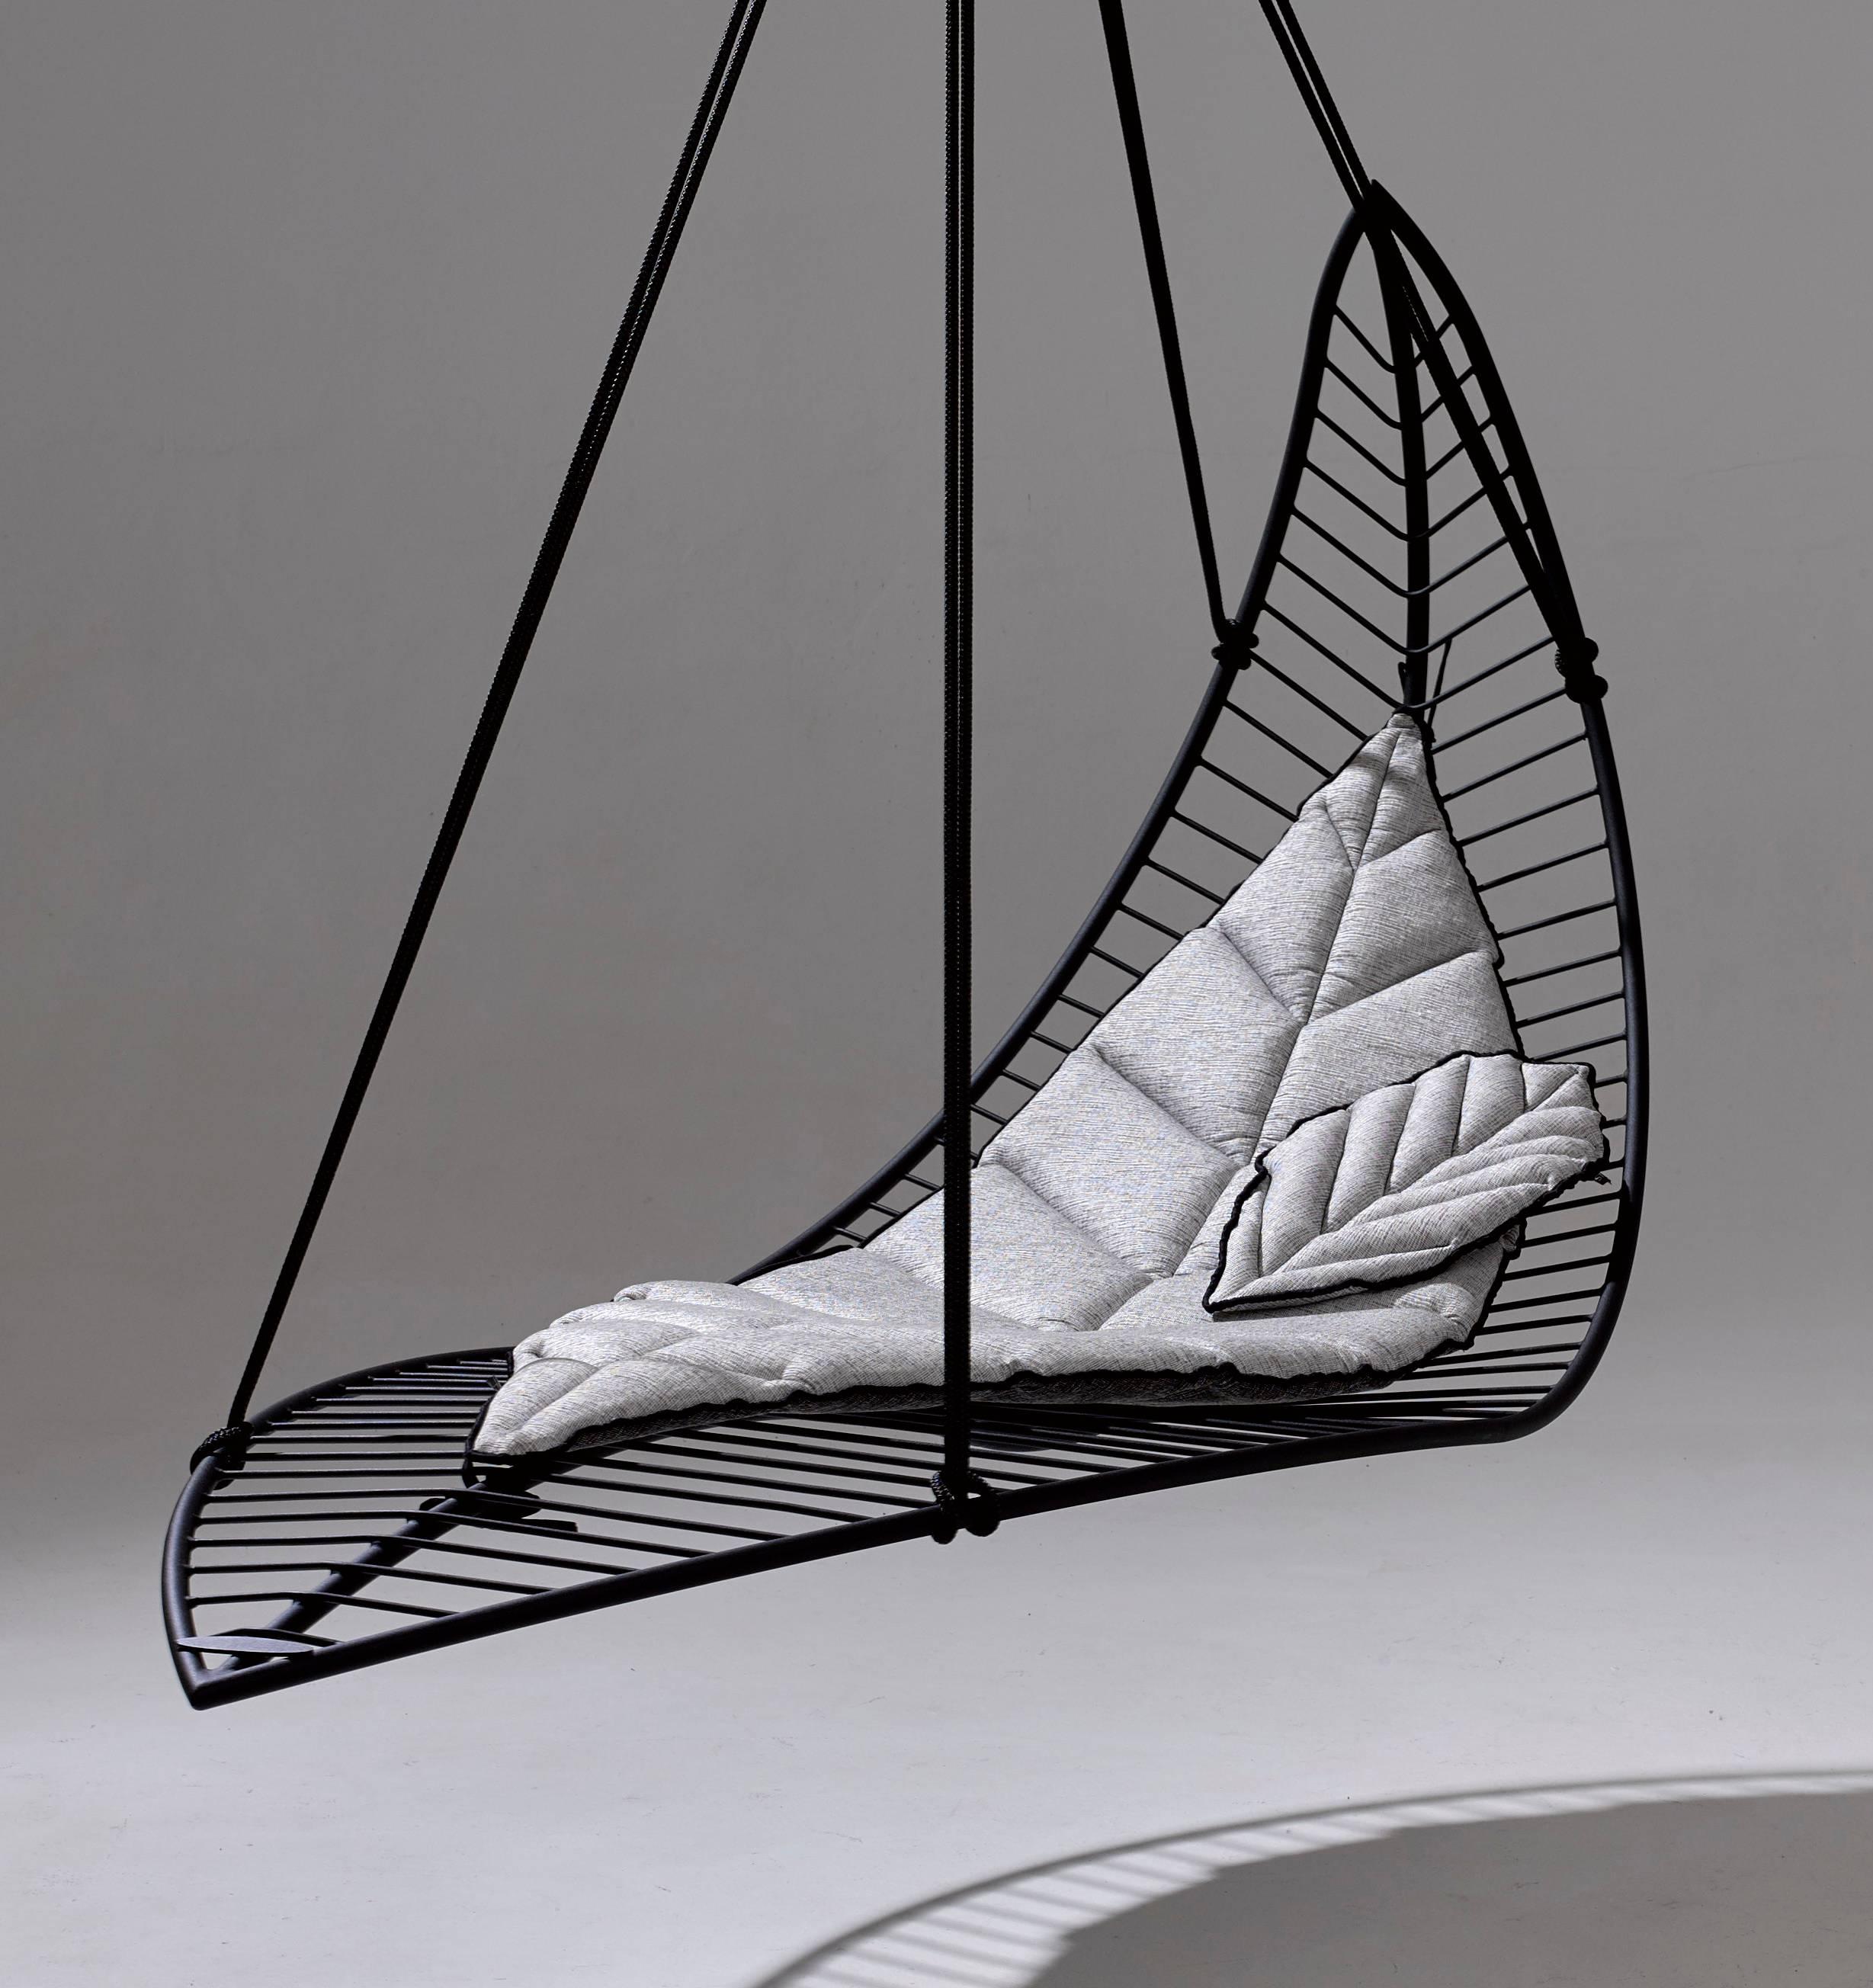 The Leaf hanging swing chair is fluid and organic. The chair is inspired by nature and is reminiscent of organic leaf shapes with its veins flowing out from the centre. It is simple and striking in its visual appeal. Choose from two different inner